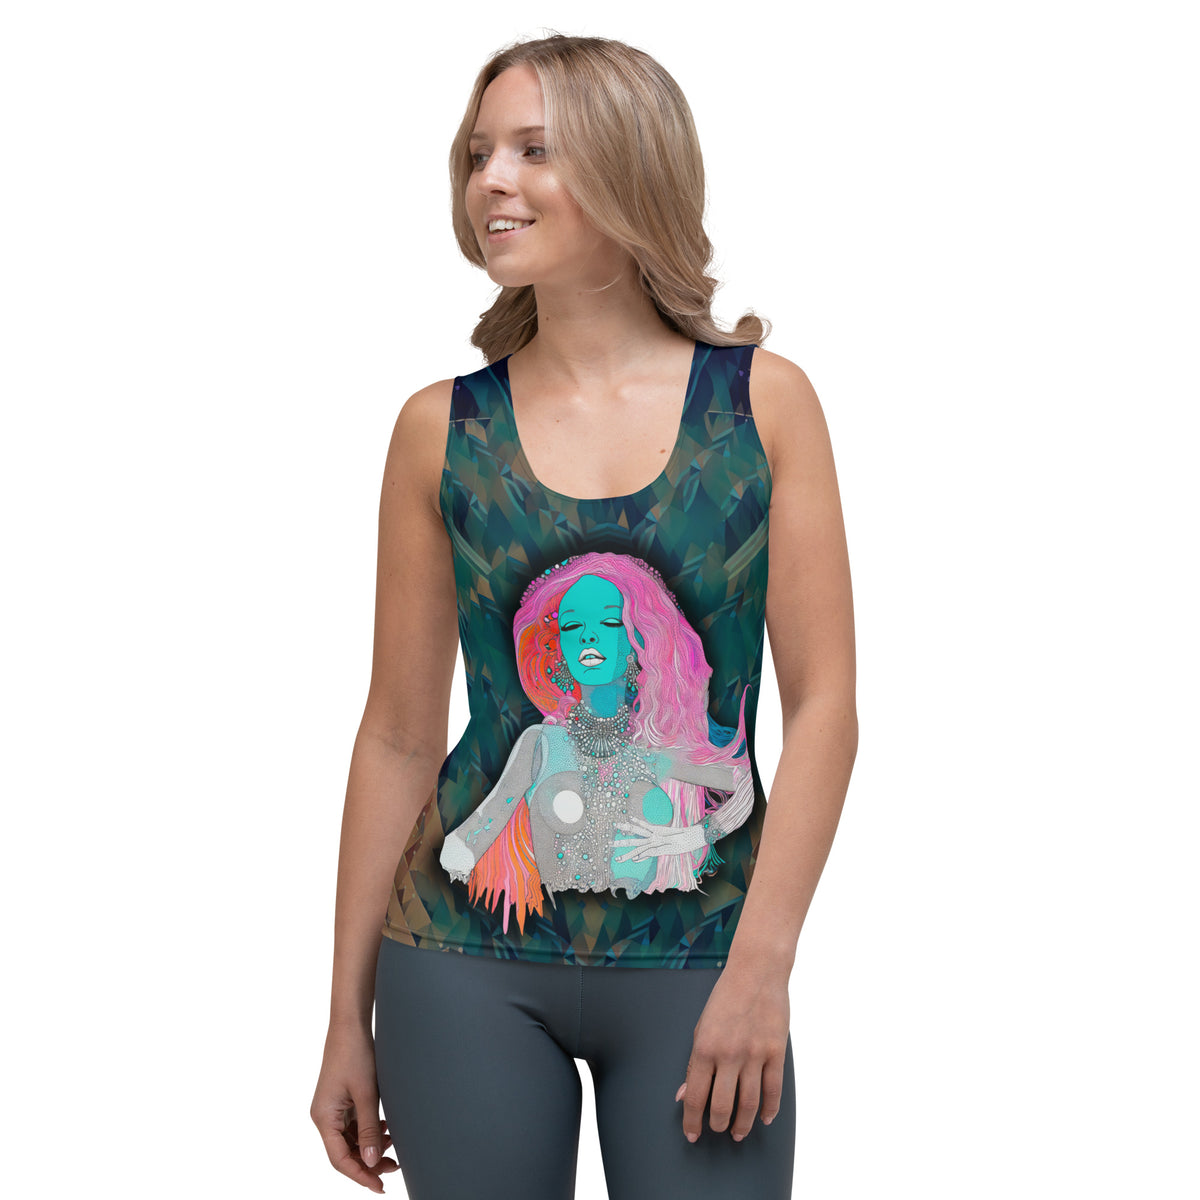 Blossom Breeze Women's Tank Top on a clothing mannequin.